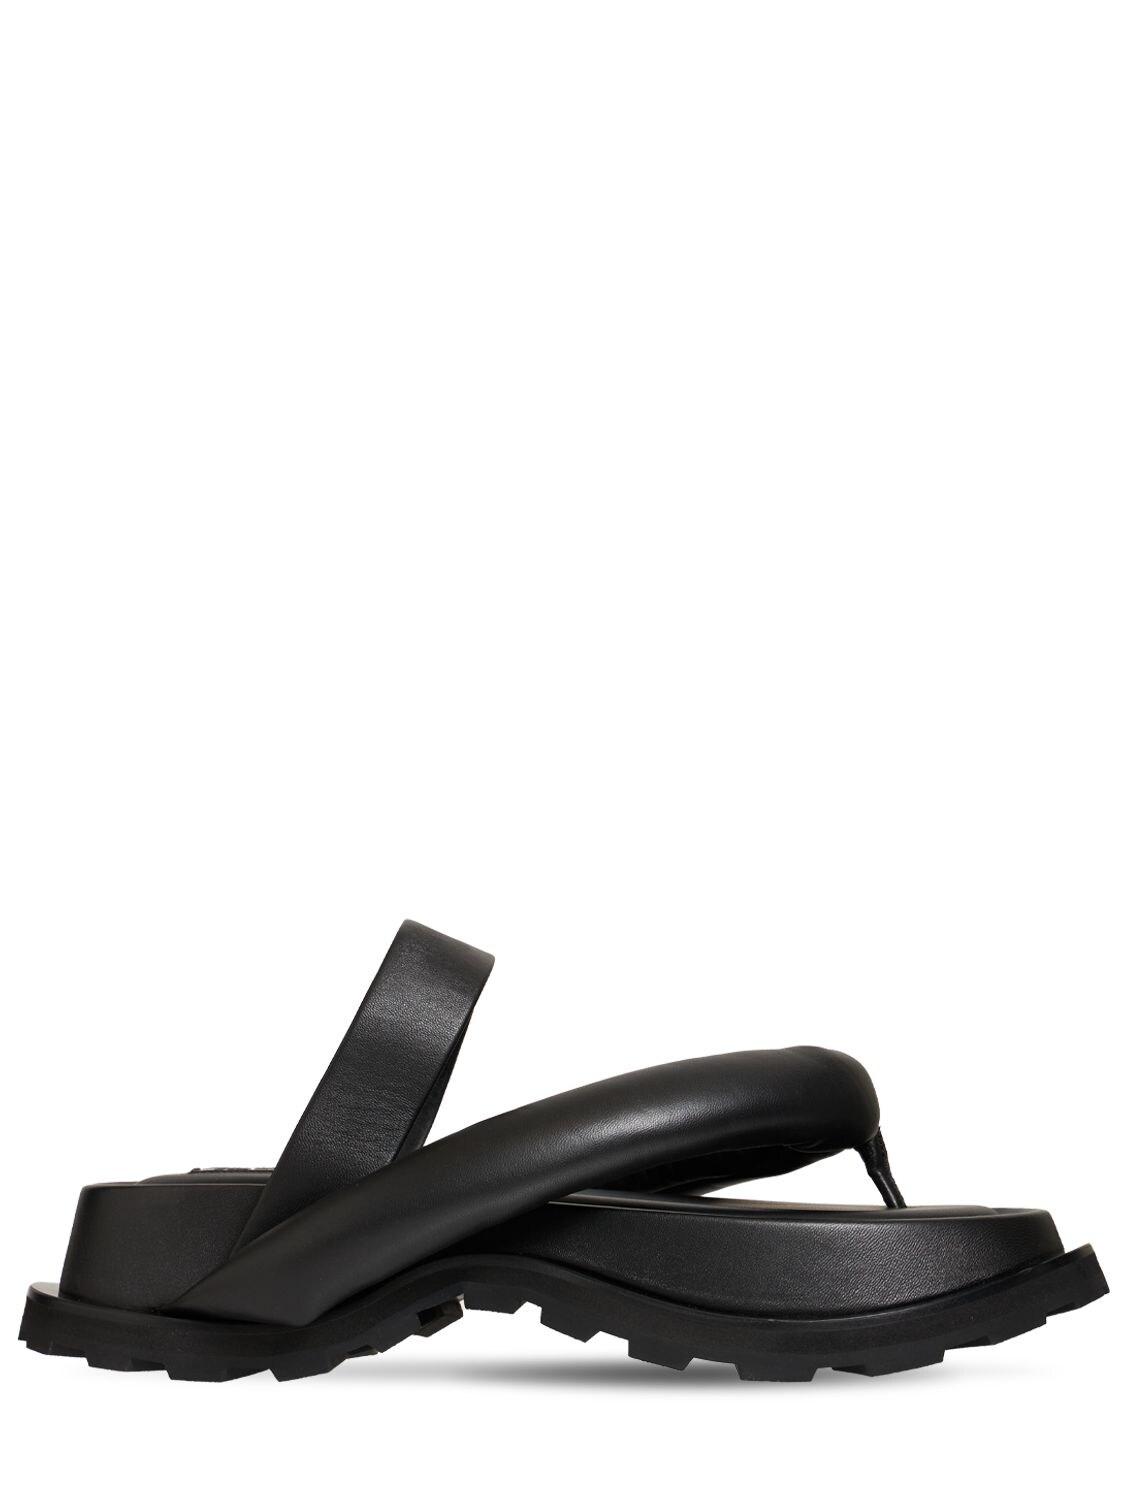 Jil Sander 40mm Padded Leather Thong Sandals in Black | Lyst